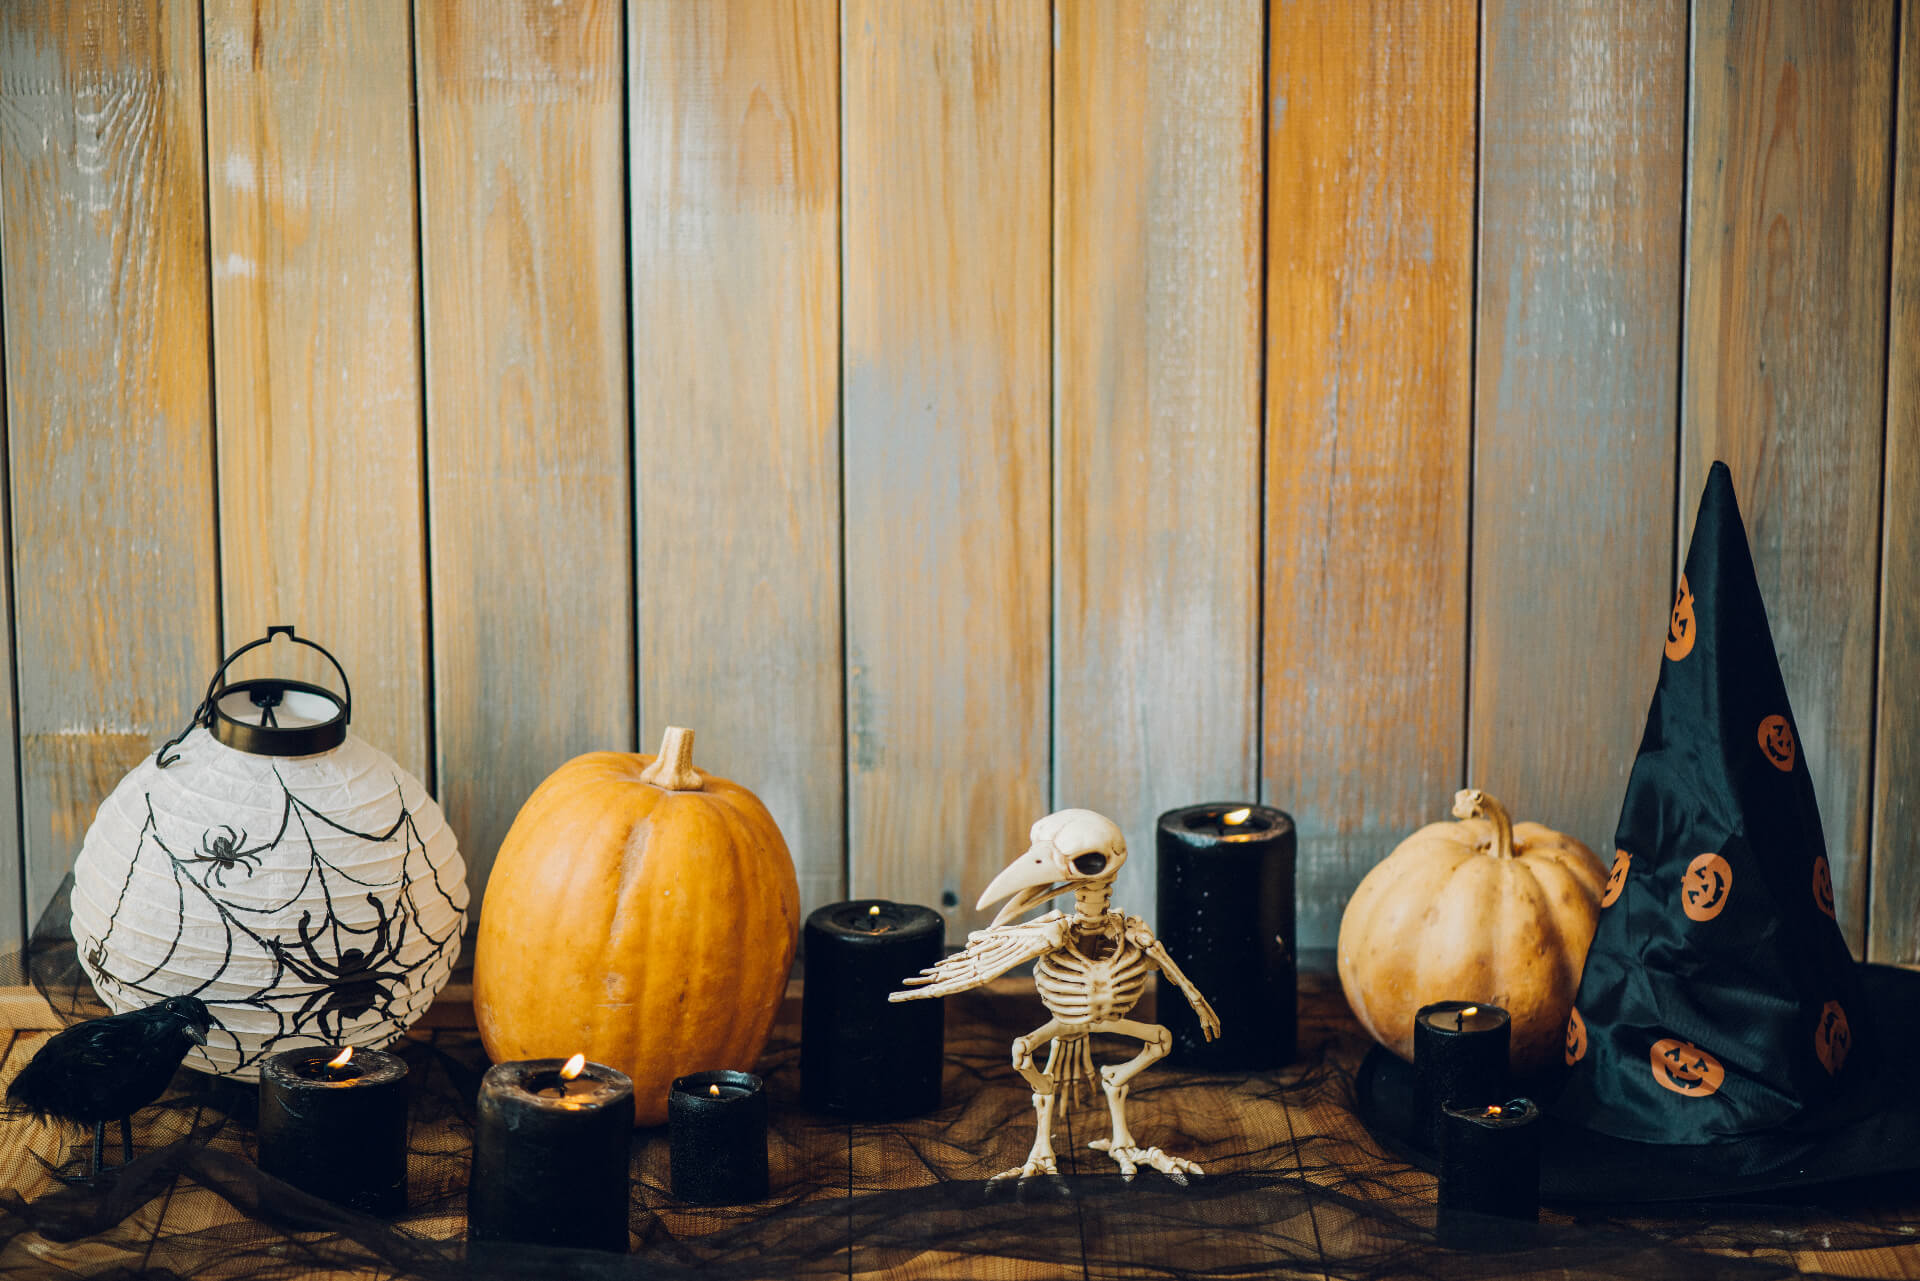 Halloween means spookiness and creativity for children. Find out how to plan an unforgettable Halloween party for the little ones.